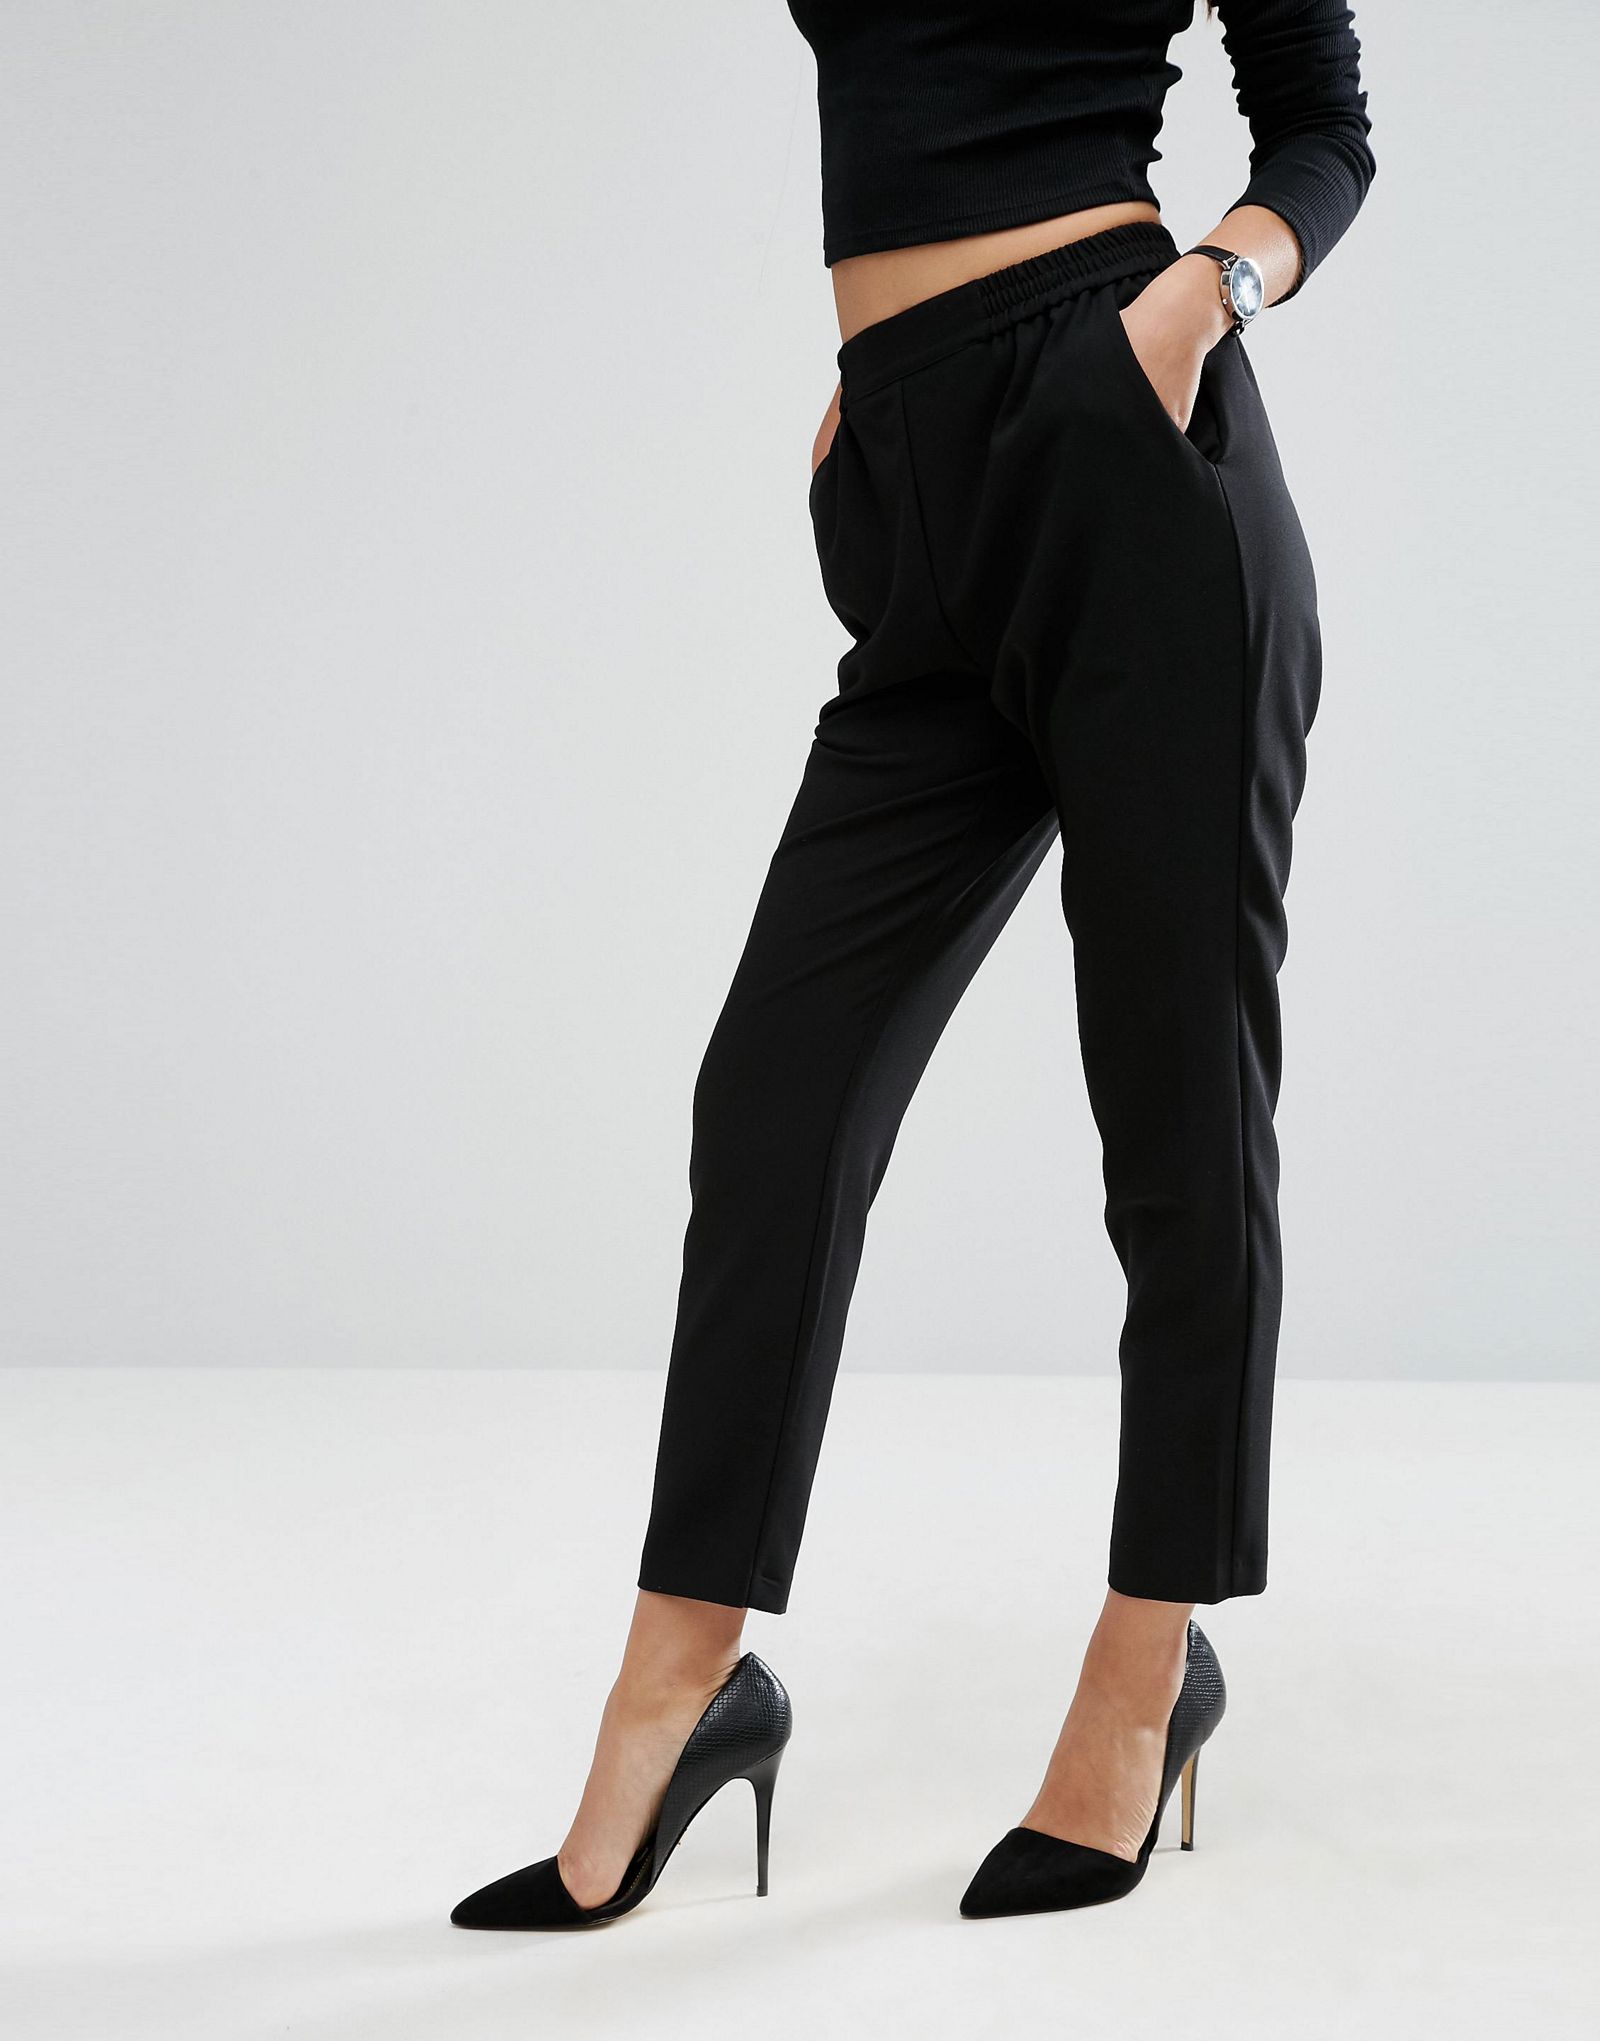 ASOS Woven Peg Pull On Trousers